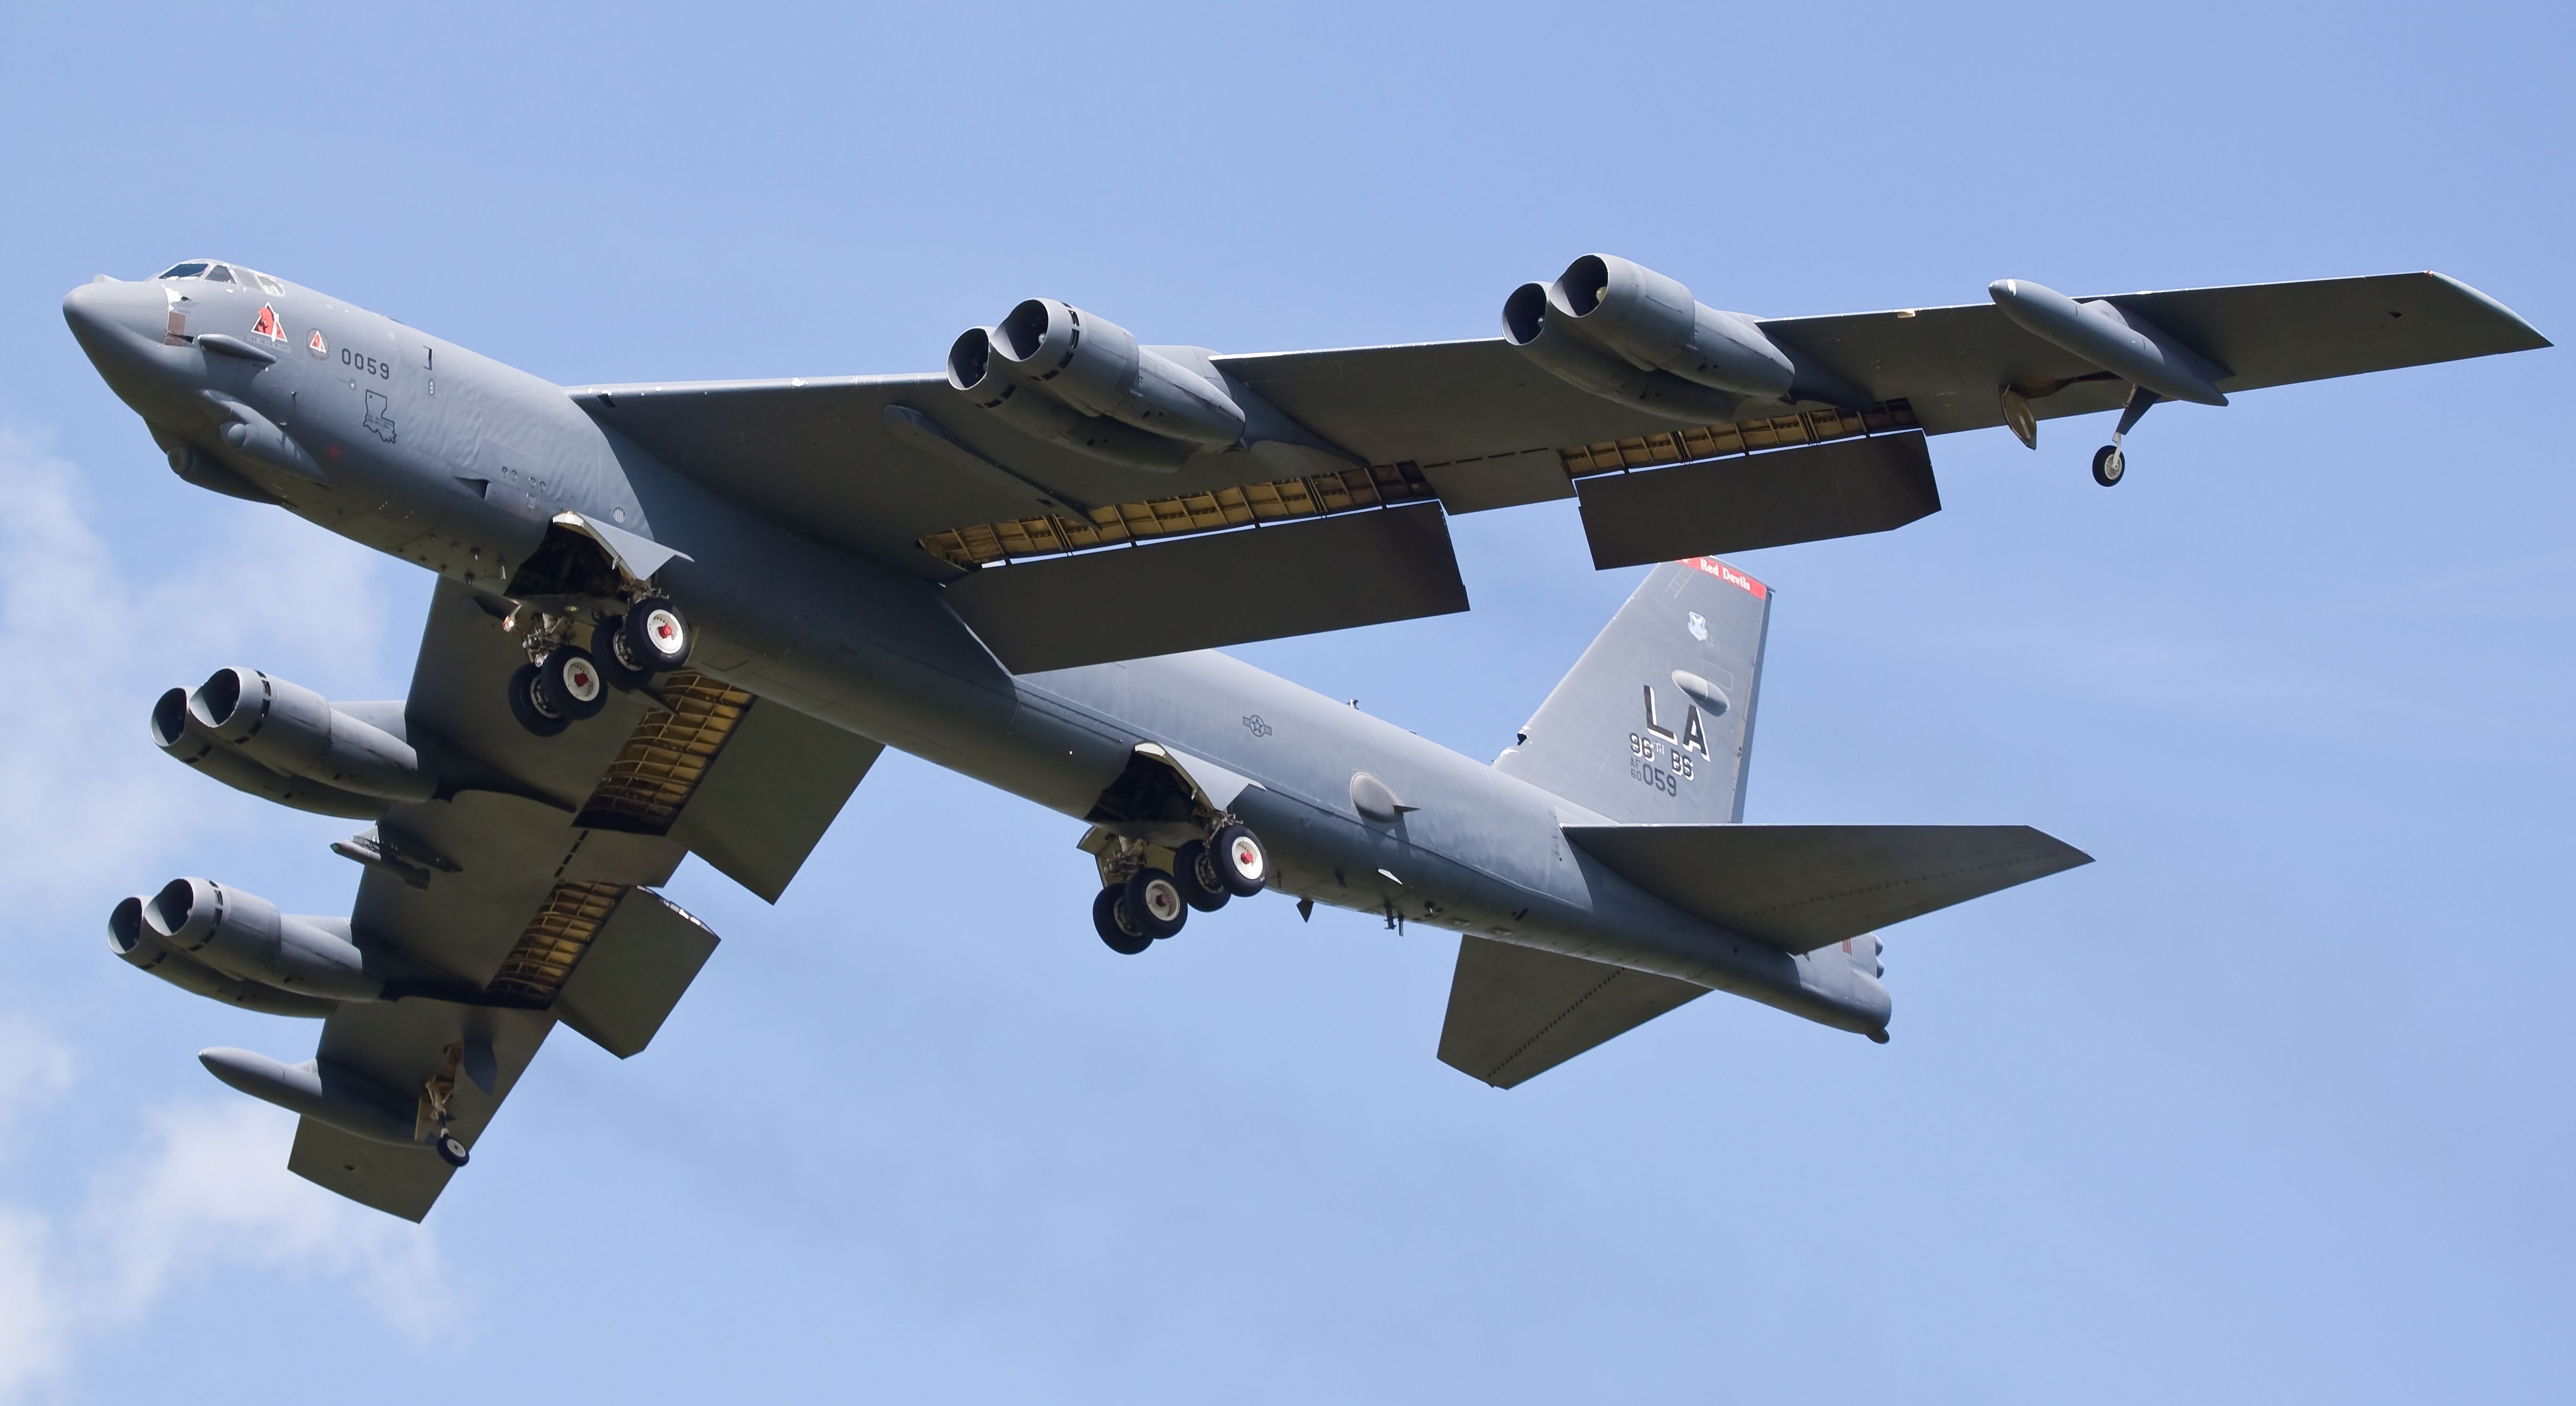 Battle Of The Bombers: Boeing B-52 Stratofortress Vs Rockwell B-1